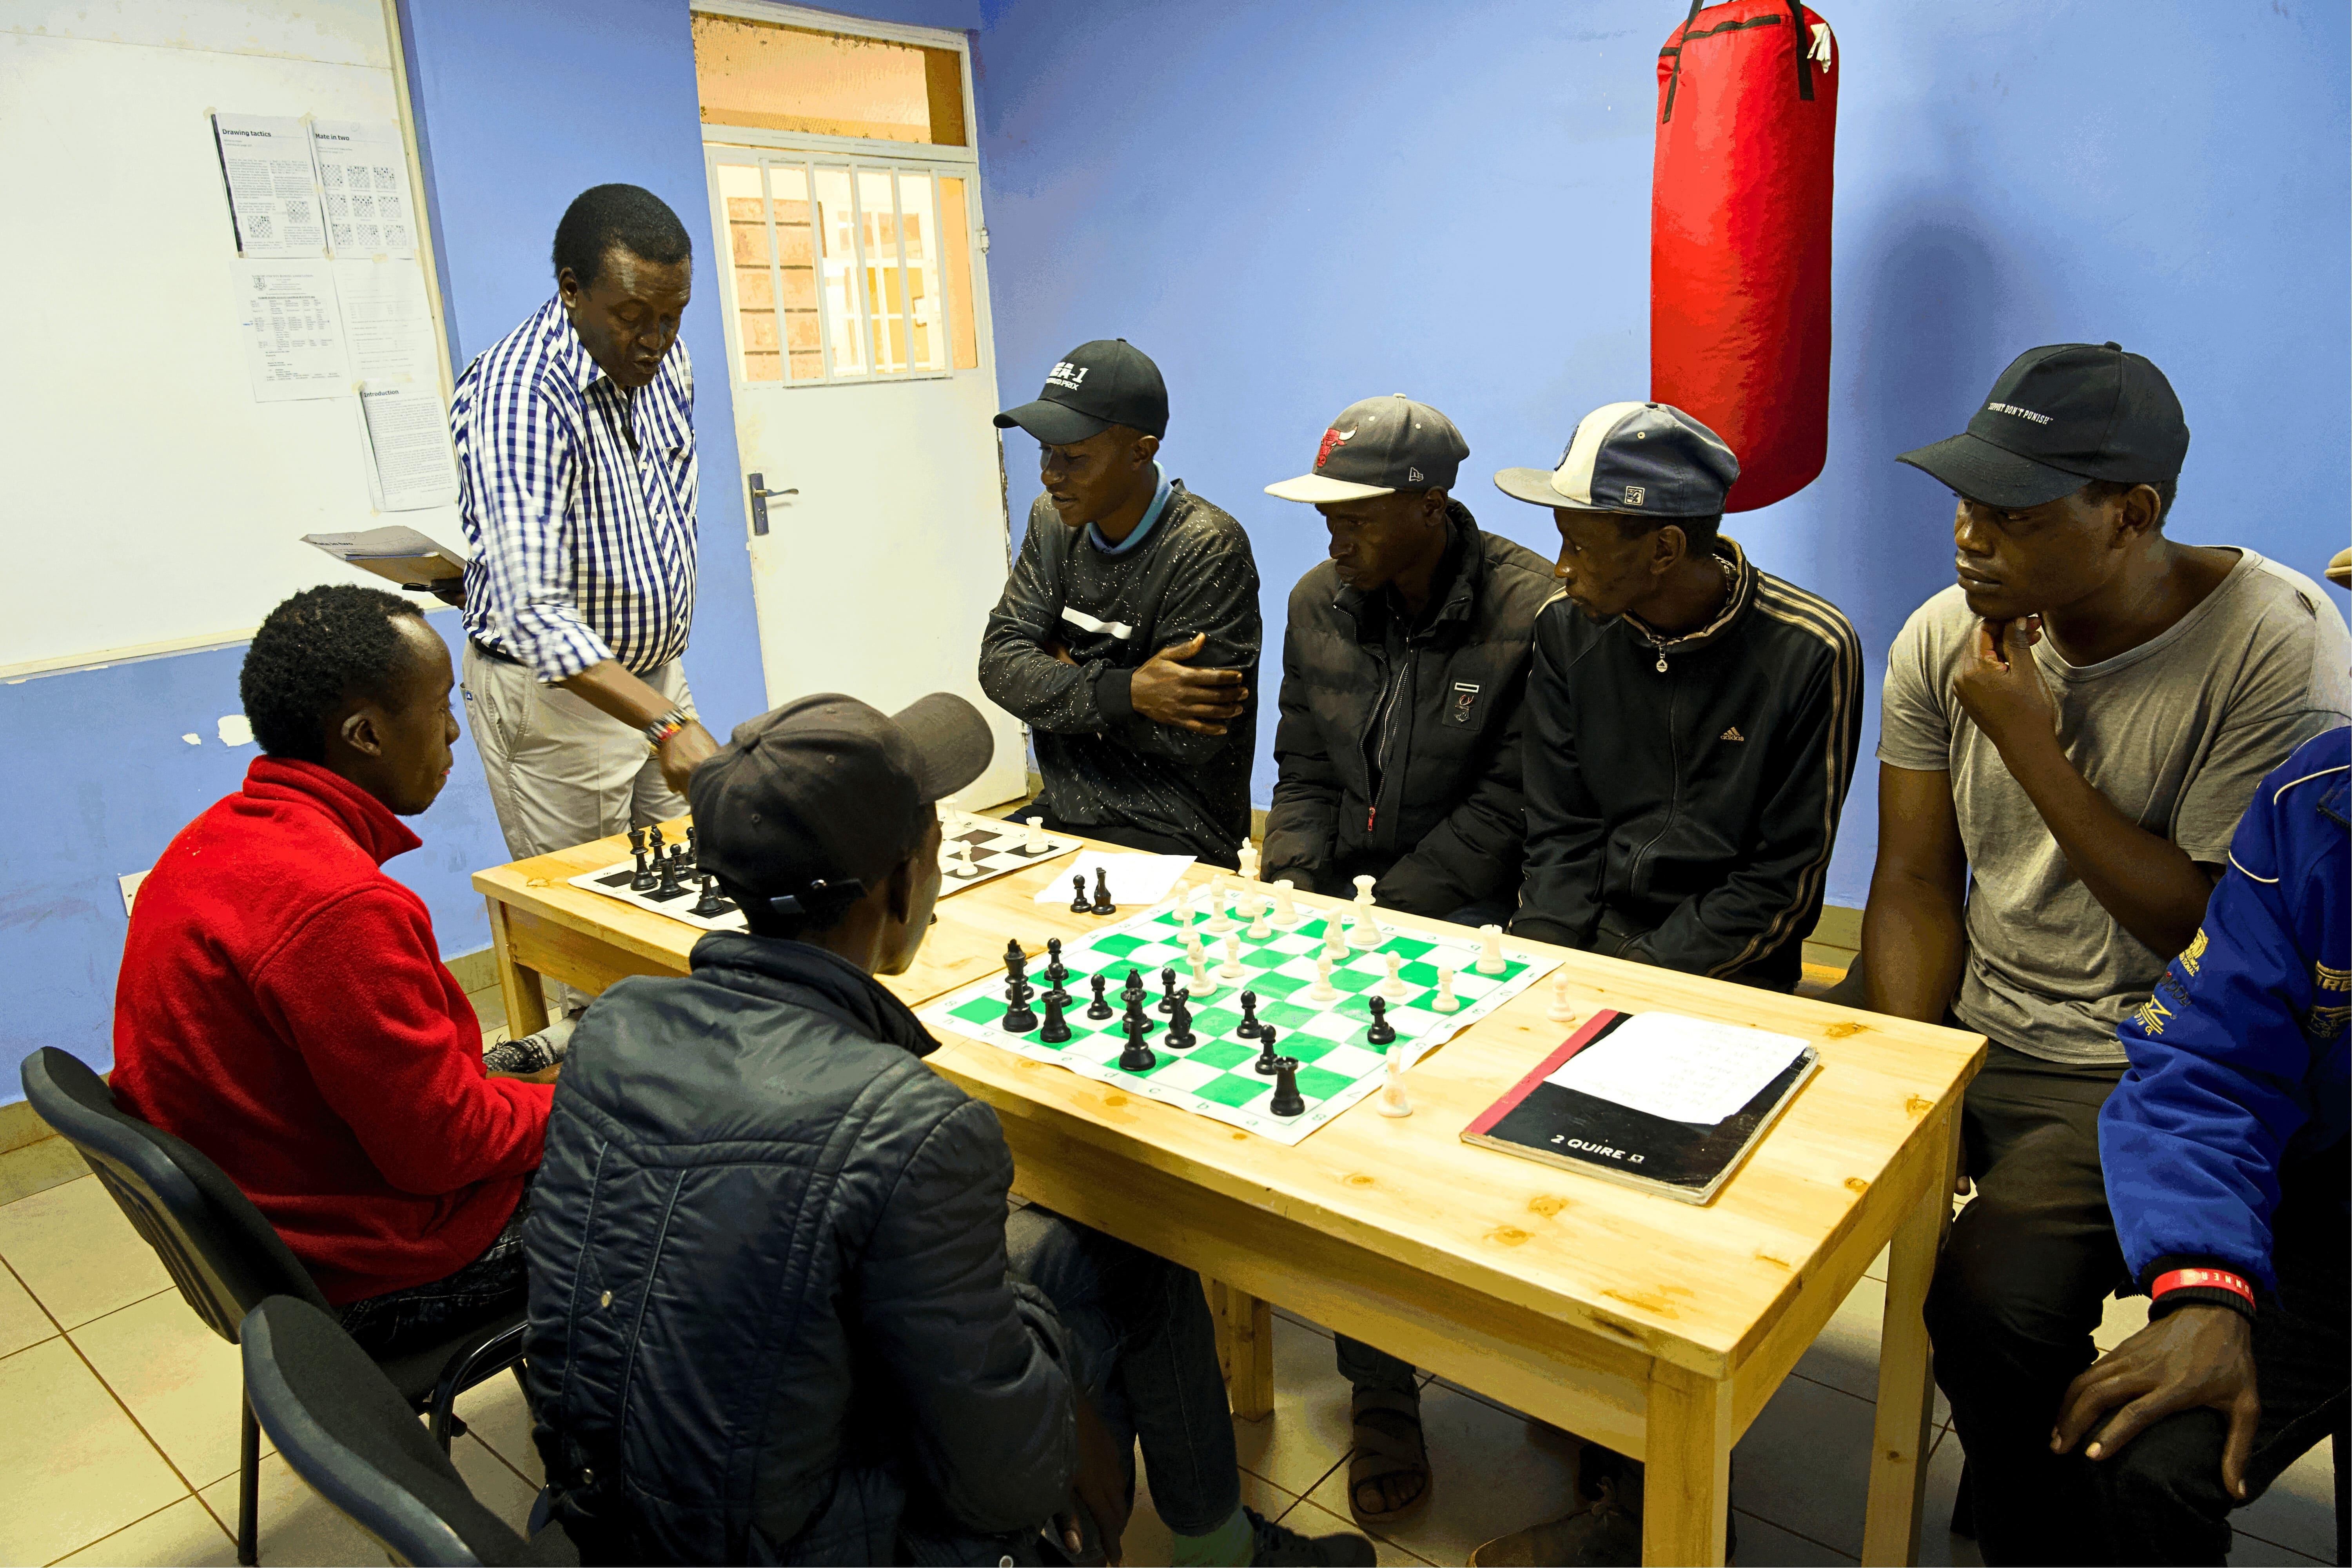 Treatment of People Who Use Drugs in Kenya: Coach Patrick standing, guides his learners as he trains them on Chess at the Karuri medically assisted therapy clinic empowerment center.